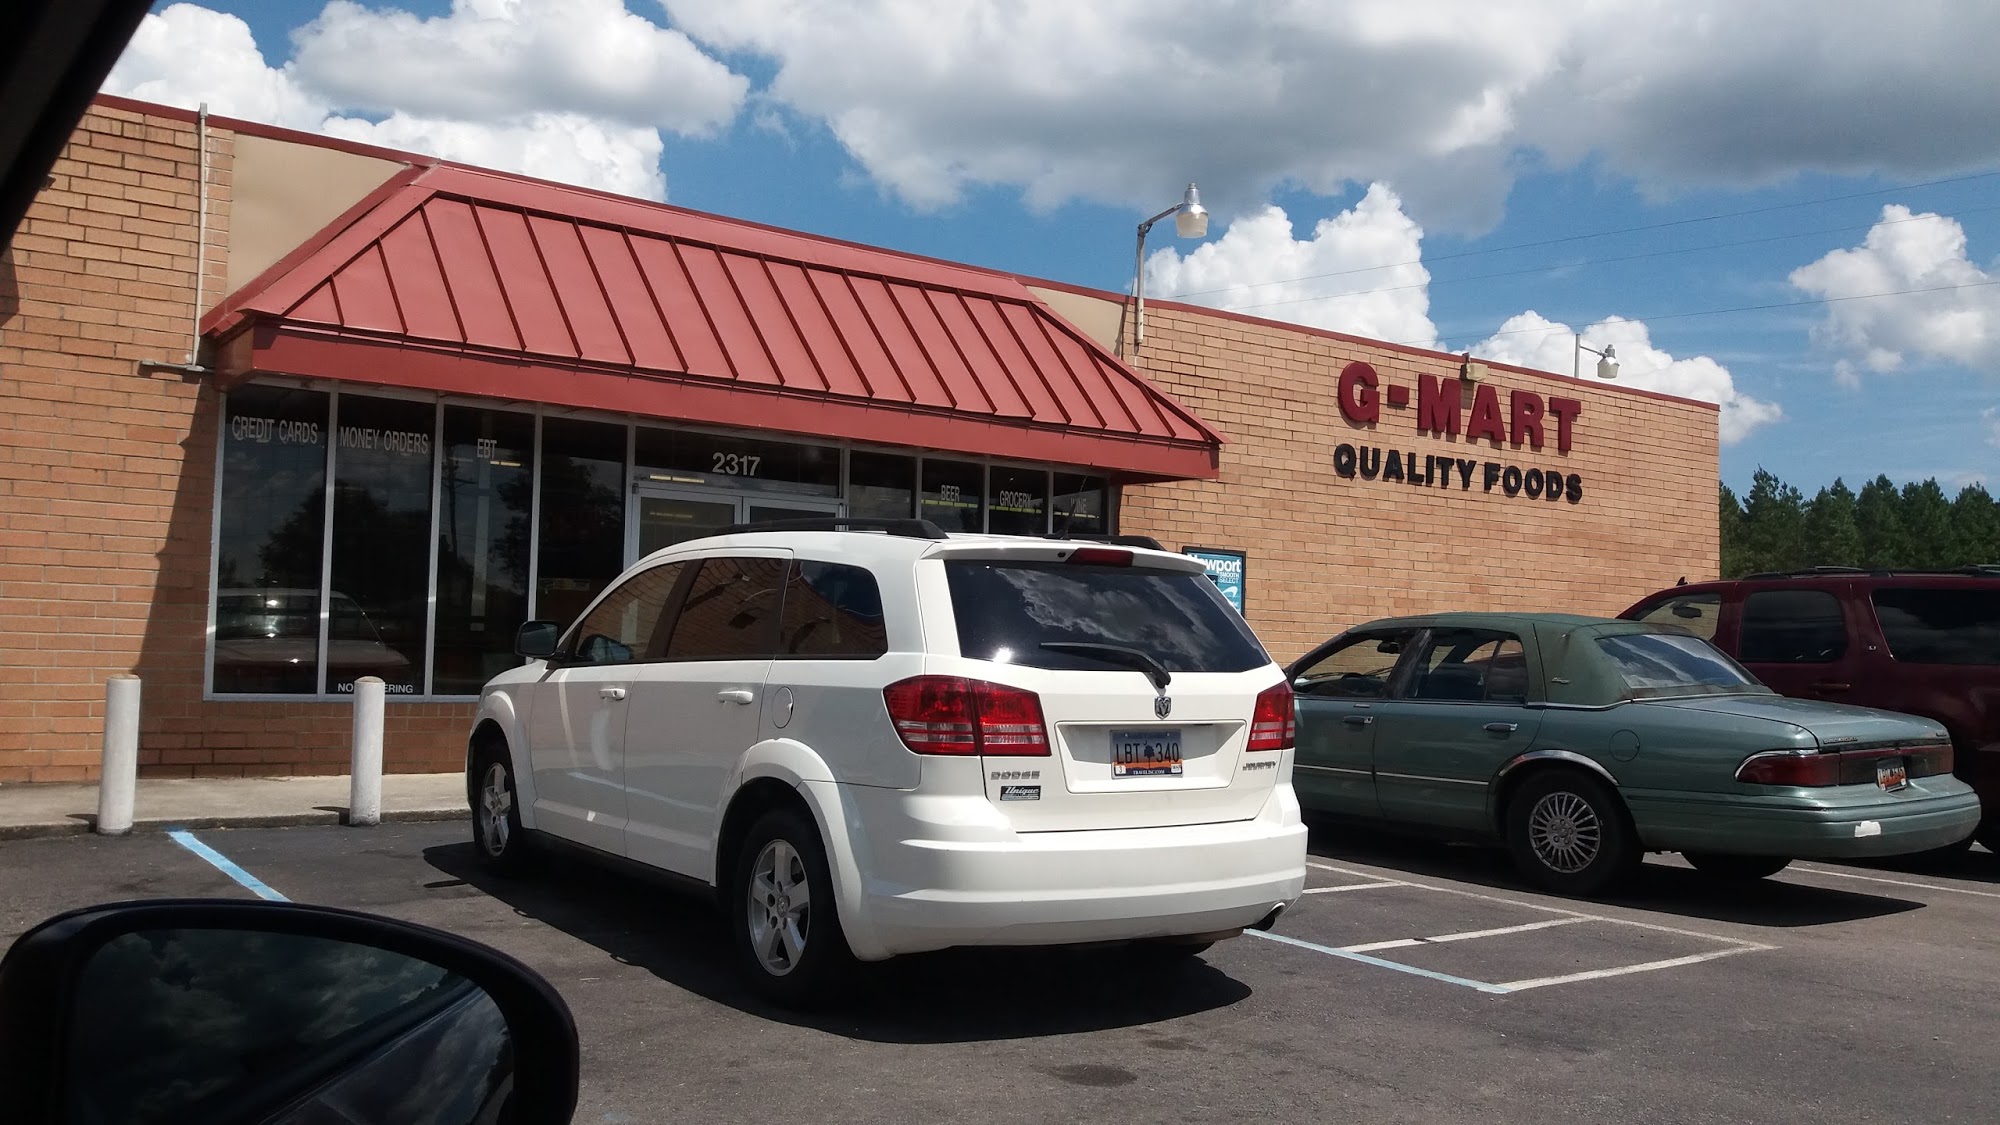 G Mart Food Store